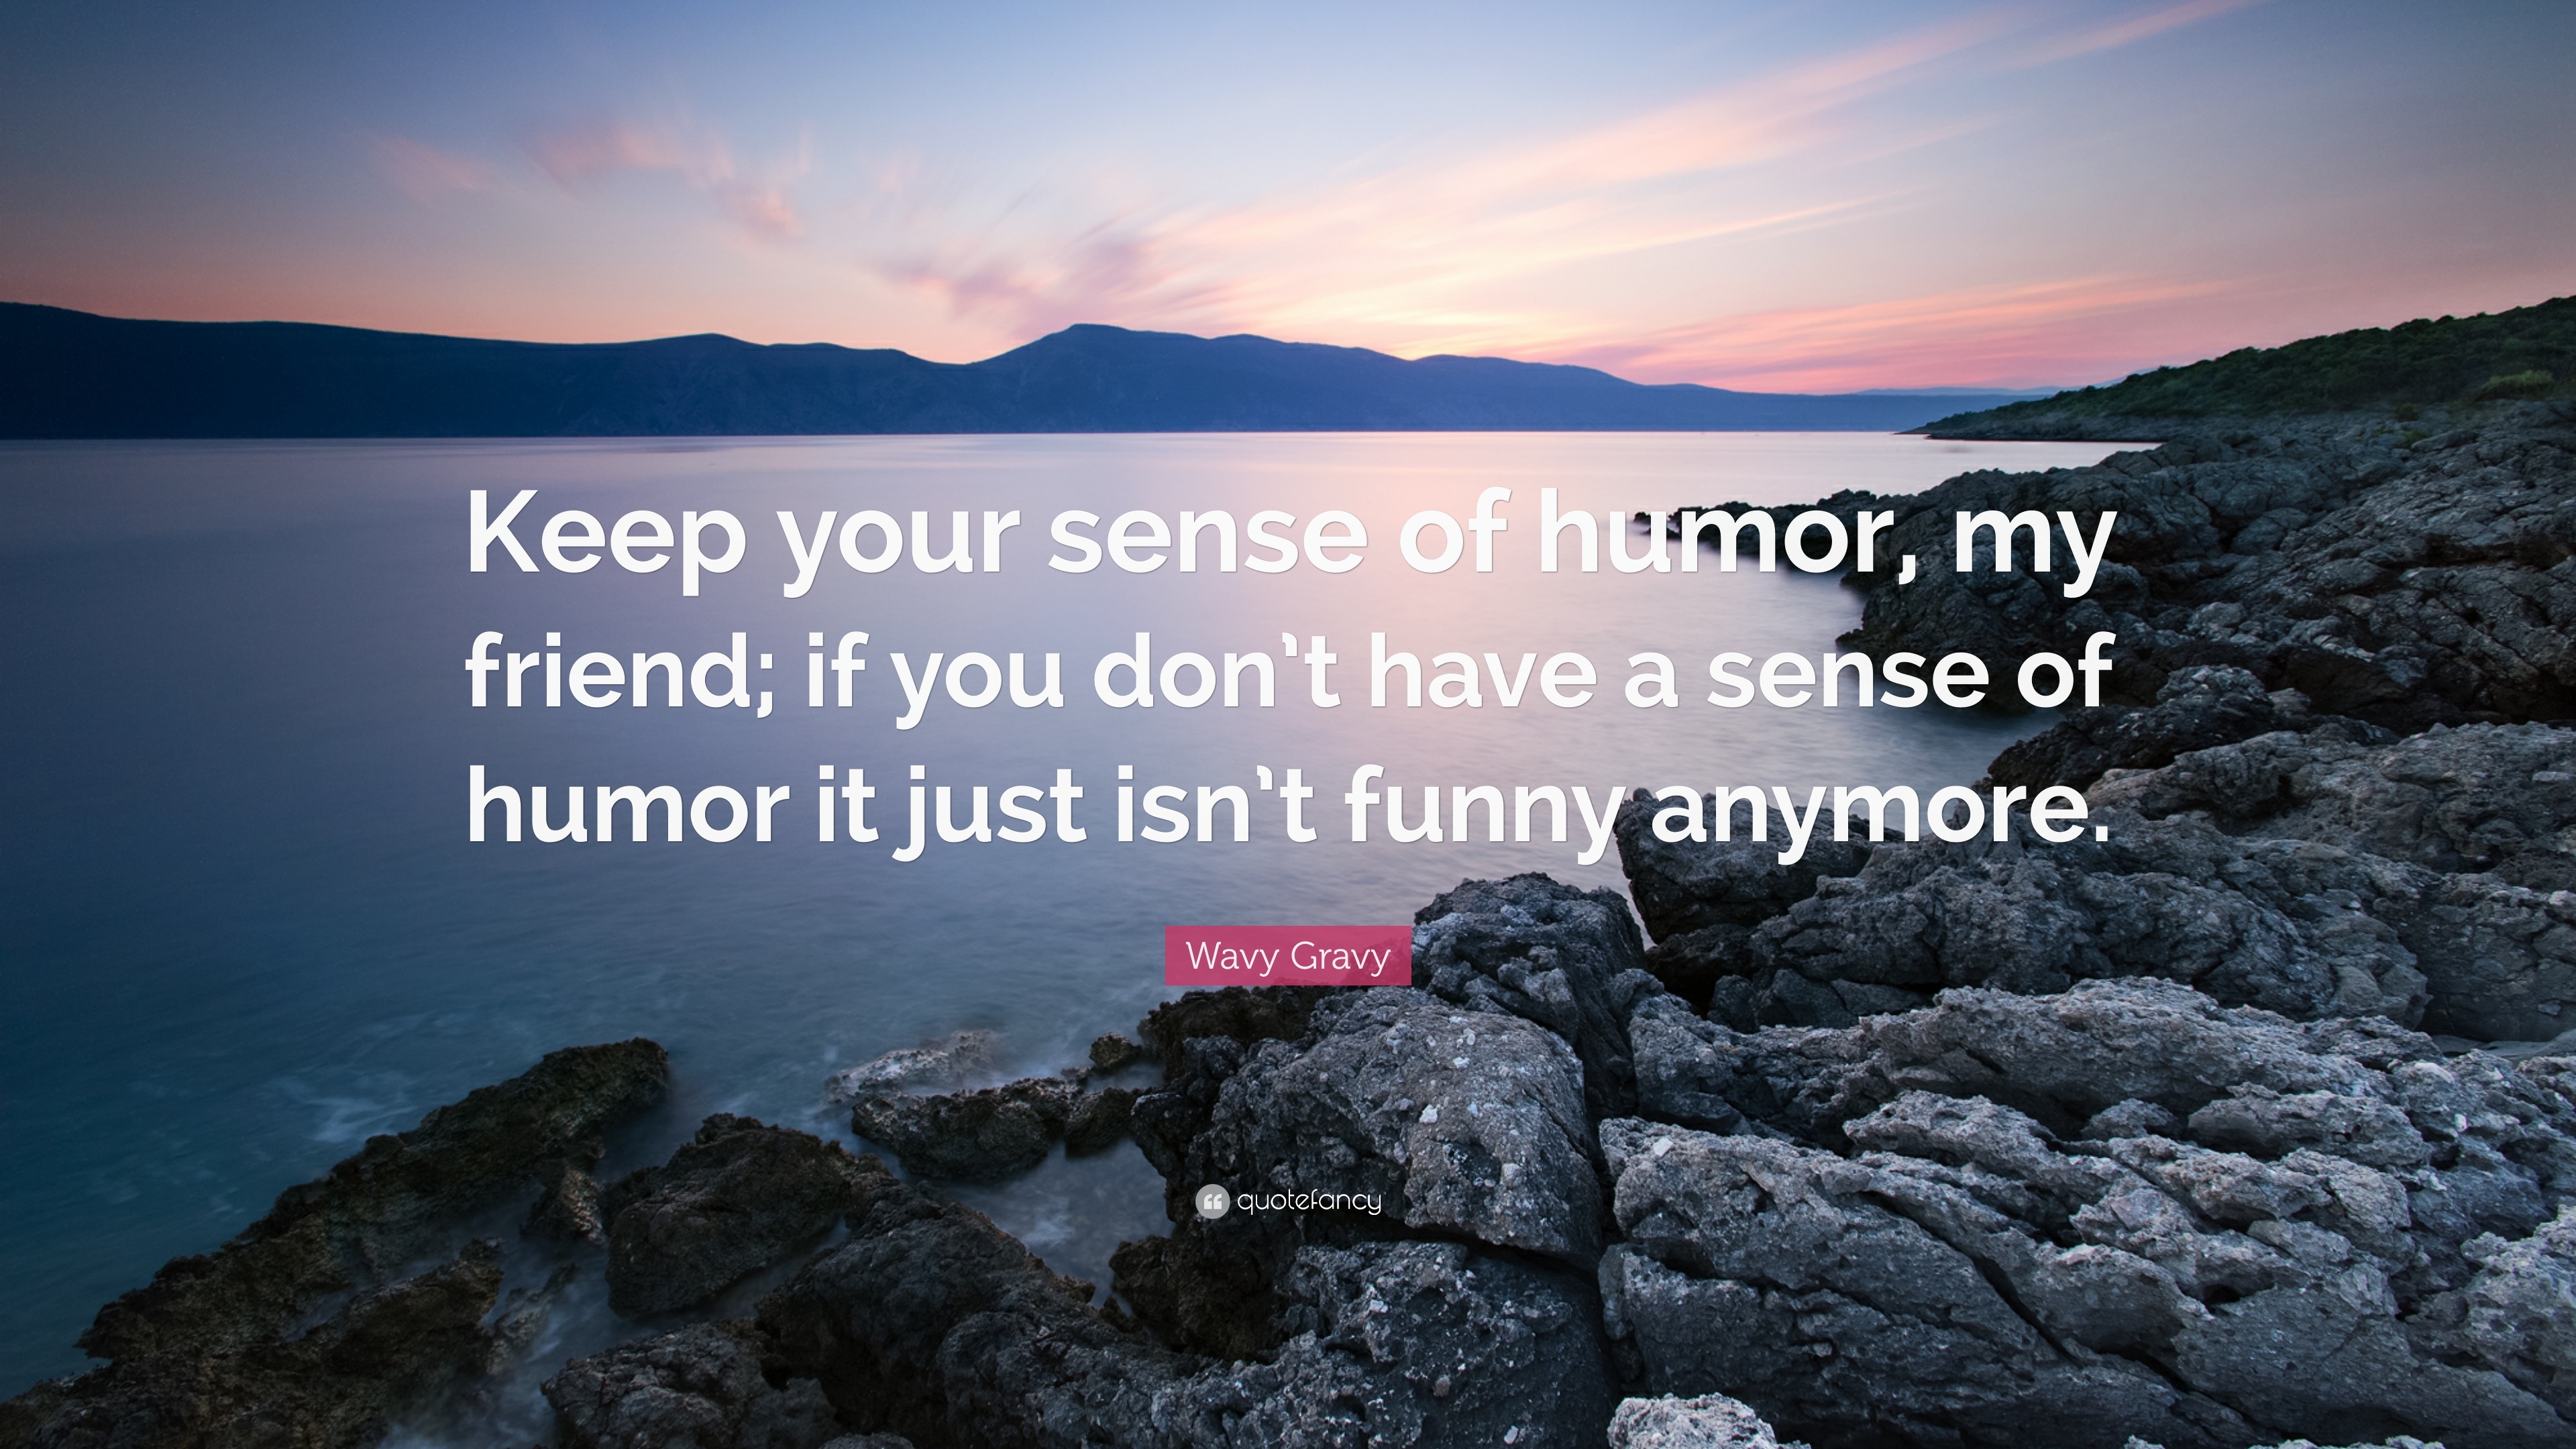 Wavy Gravy Quote: “Keep your sense of humor, my friend; if you don't have a